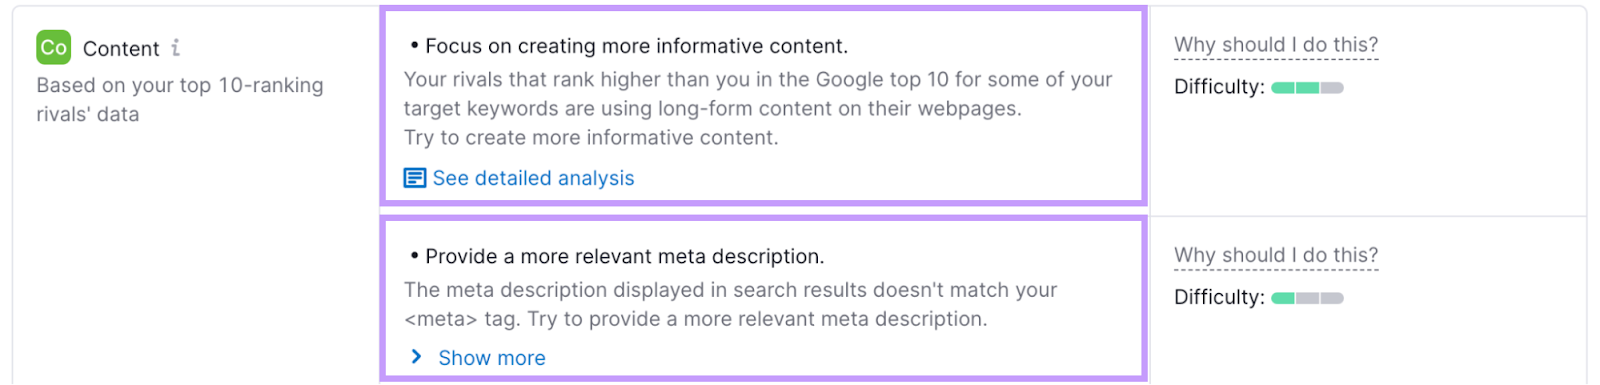 content ideas category showing two ideas, related to creating more informative content and providing more relevant meta descriptions